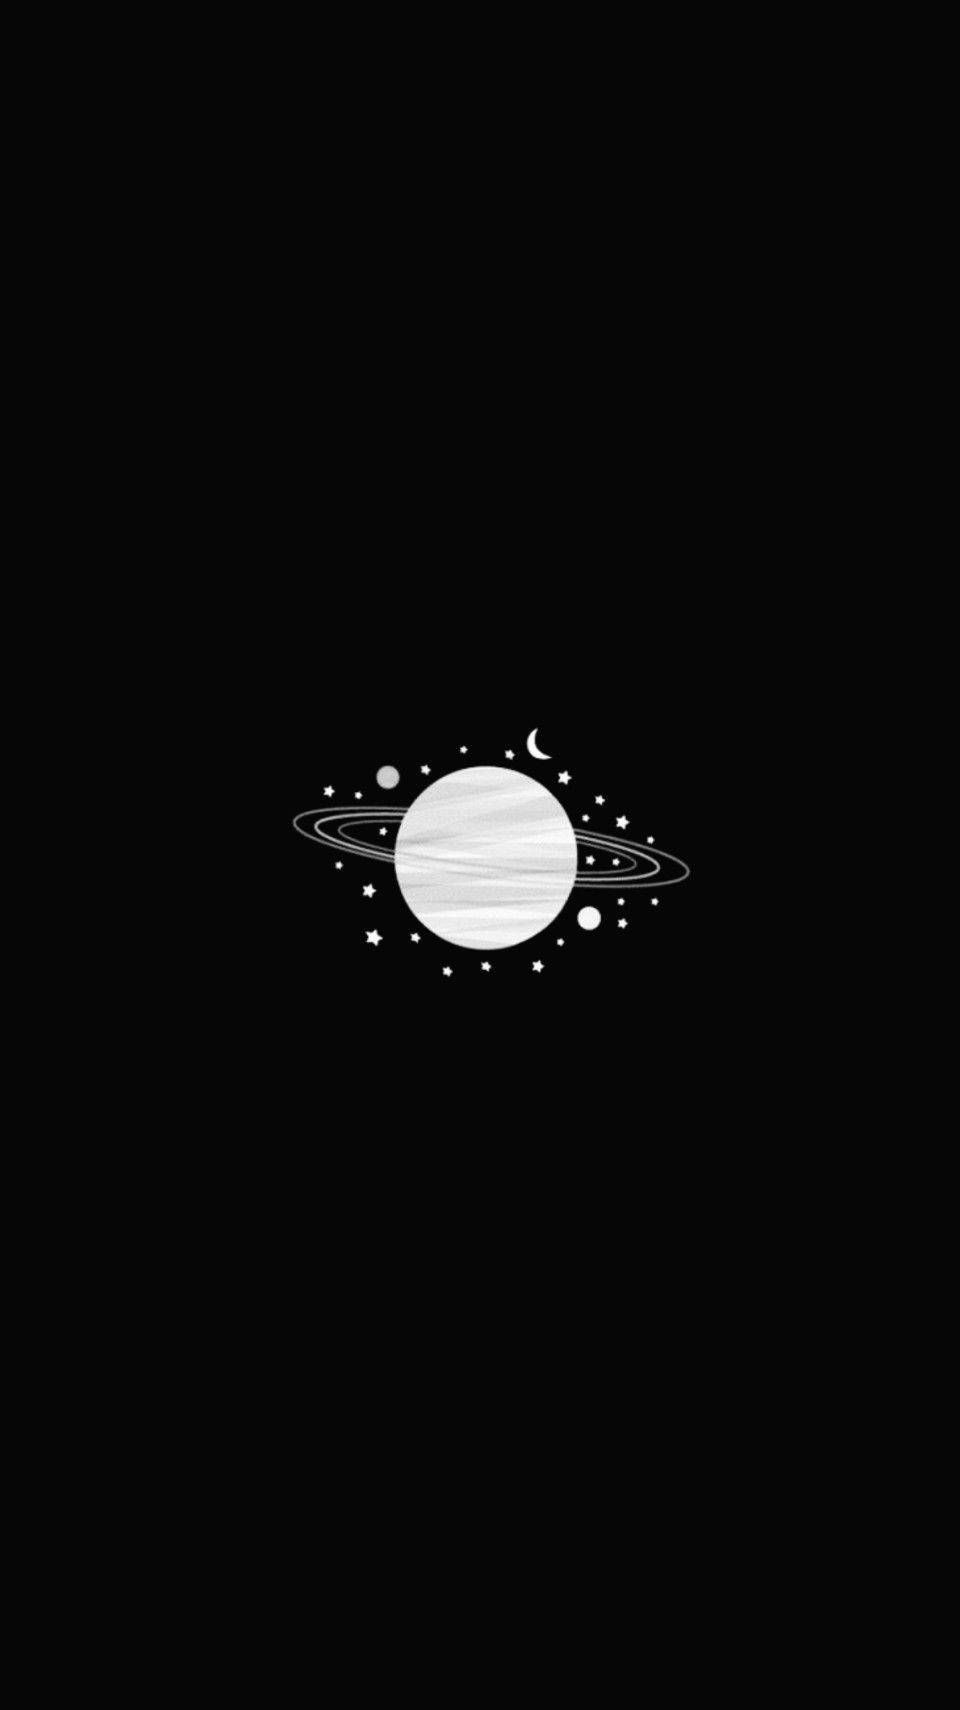 A black and white image of the planet saturn - Black phone, black, dark phone, planet